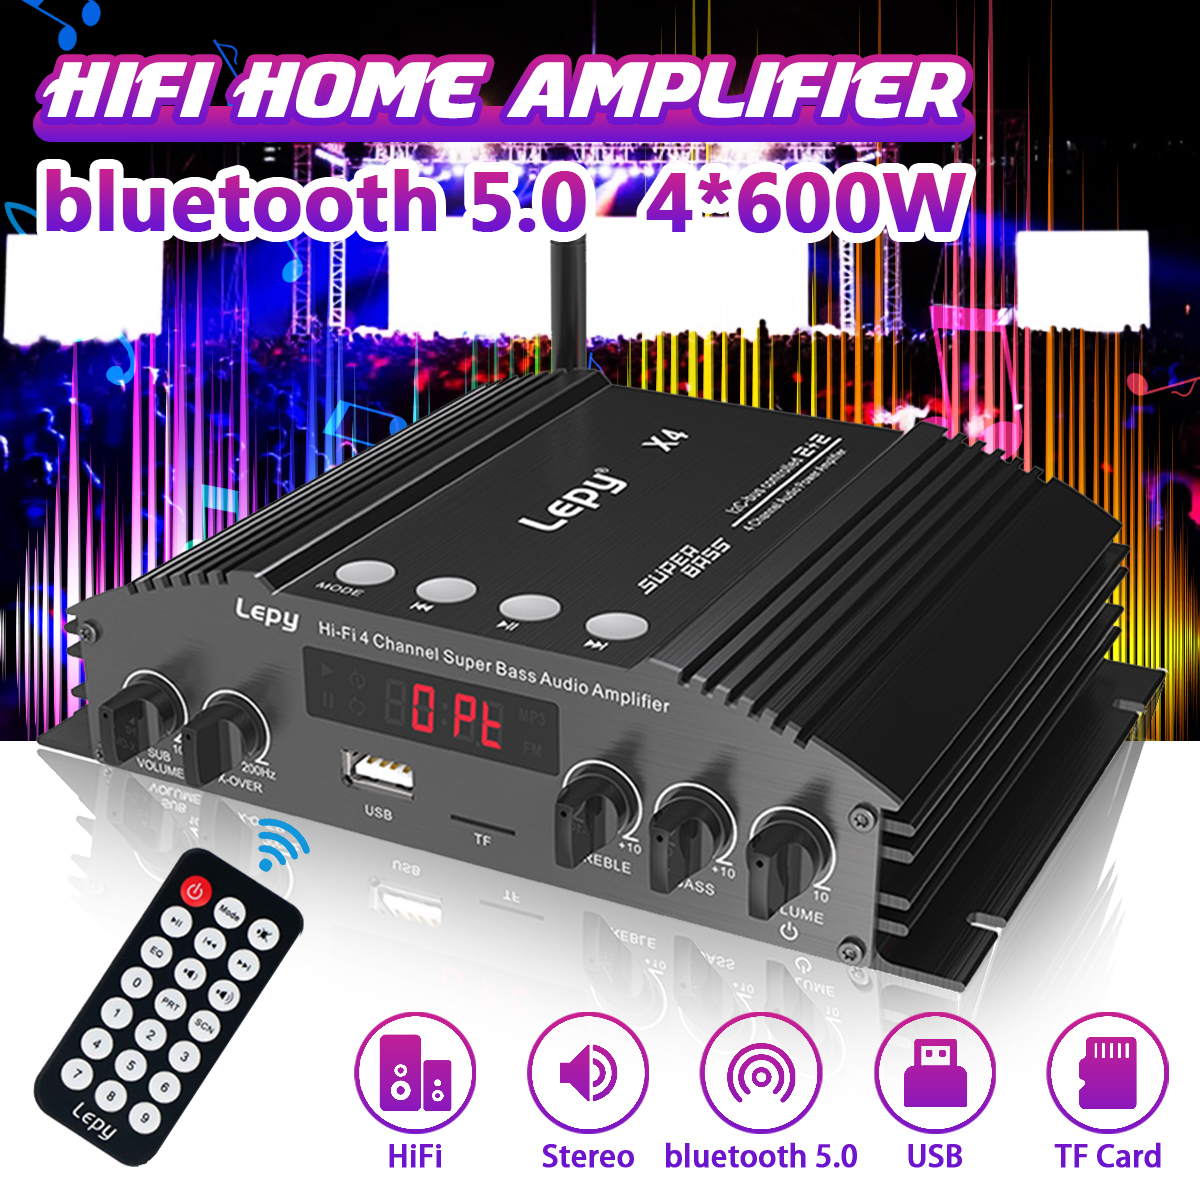 Find MS 4 60W 4 Channel Audio Power Amplifier Stereo TF Card AUX bluetooth HiFi Home Amplifier Mini HIFI Digital bluetooth Amplifier for Sale on Gipsybee.com with cryptocurrencies